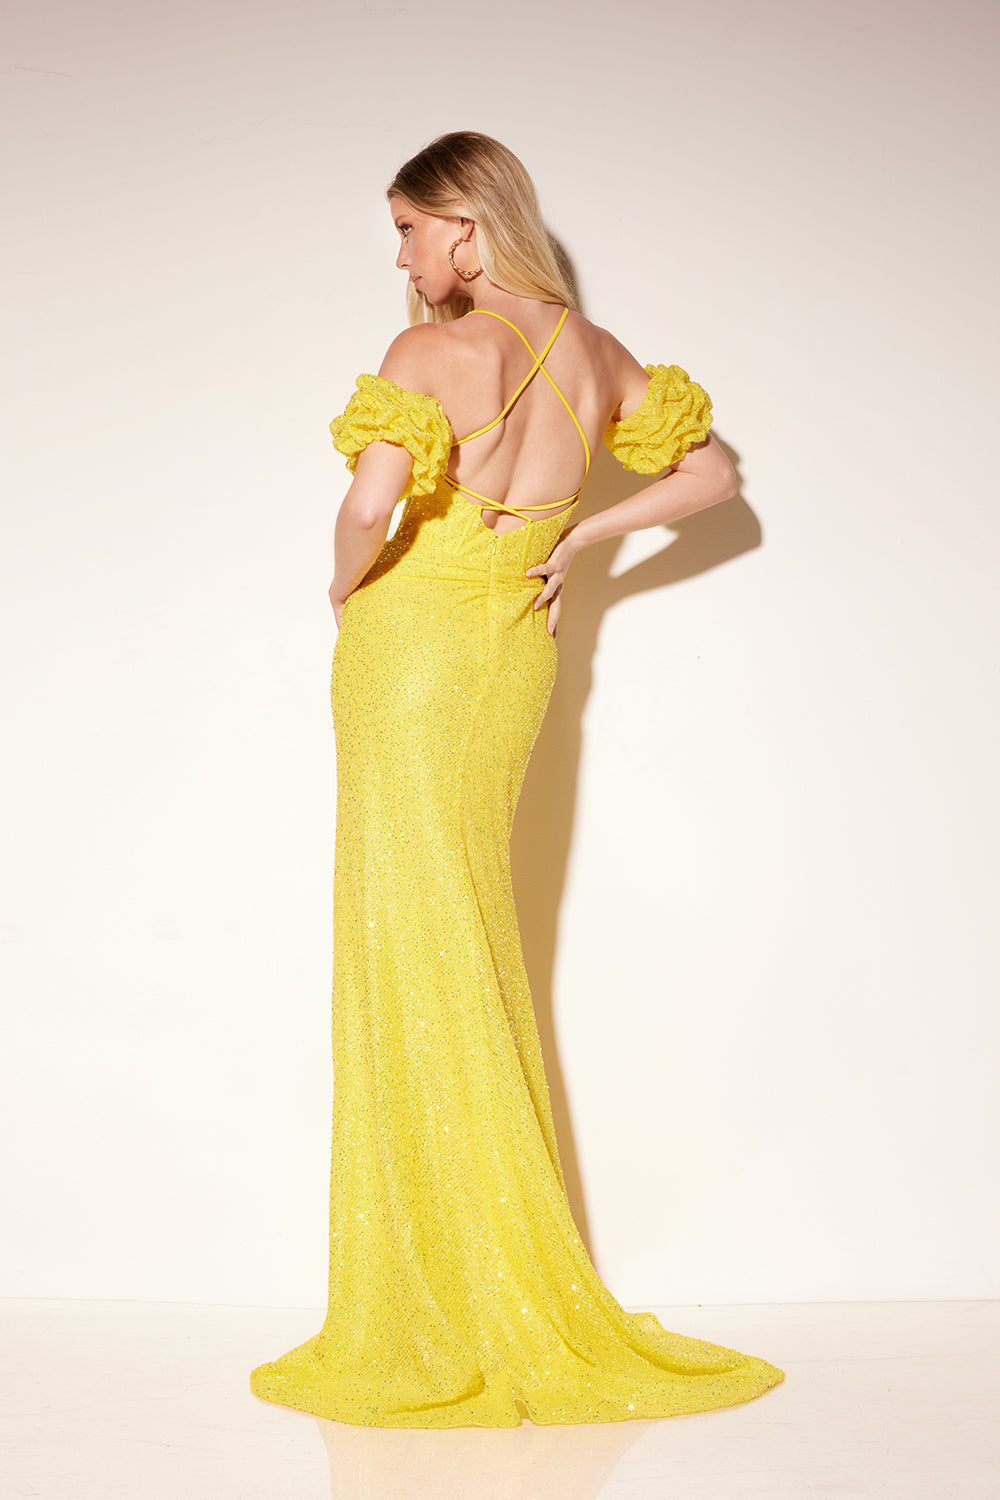 Lucci-Lu-1302-Sweetheart-Neckline-Open-Back-High-Slit-Sequins-Fit-N-Flare-Yellow-Evening-Dress-B-Chic-Fashions-Prom-Dress